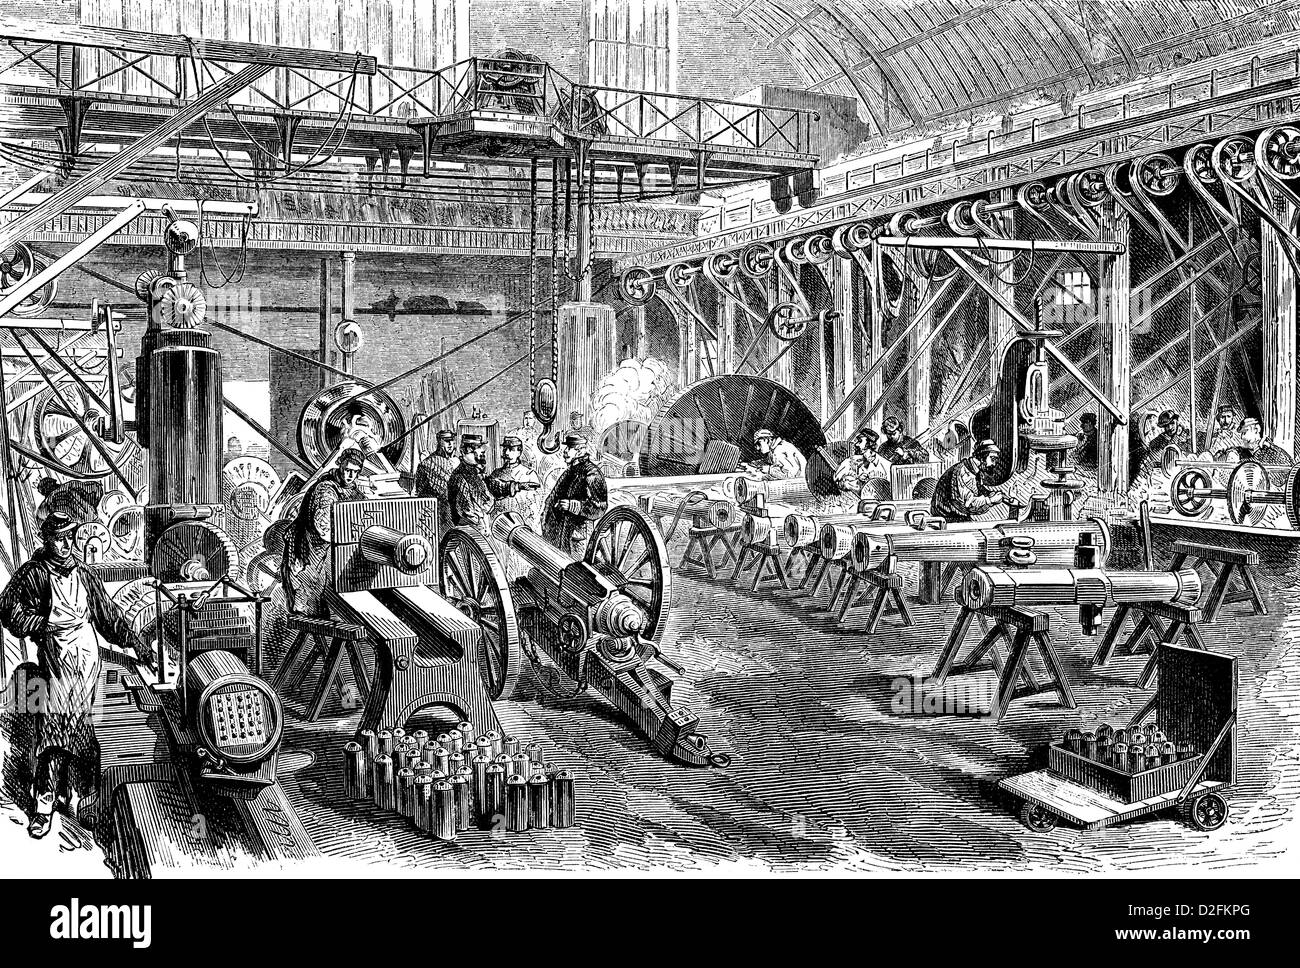 Production of cannons in a foundry, Paris, historic scene from the Franco-German War, 1870 - 1871 Stock Photo